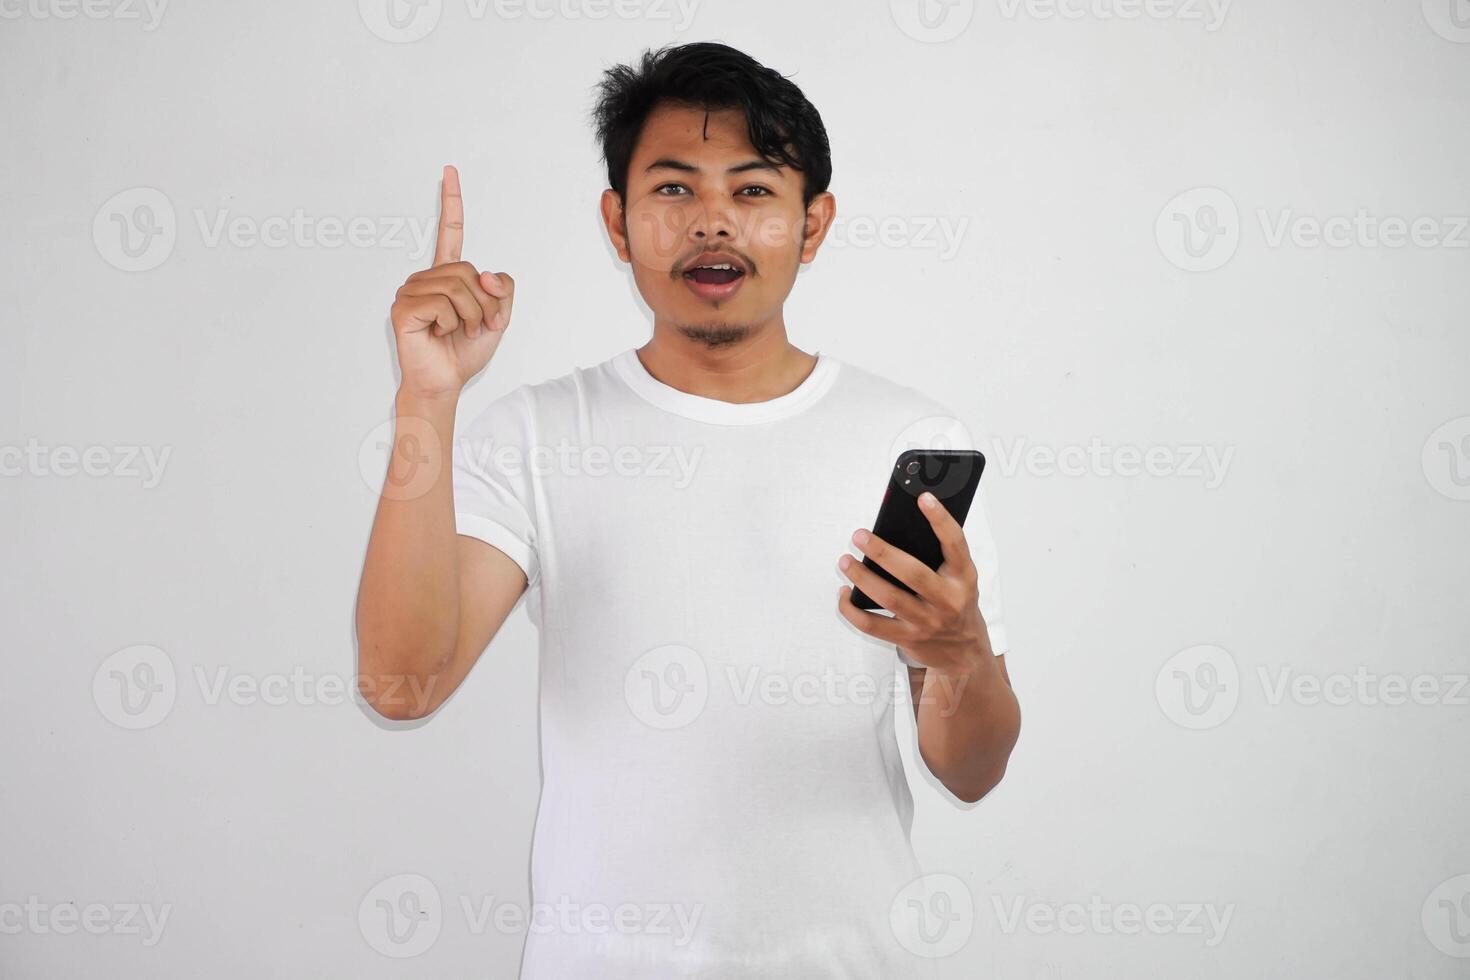 Excited young Asian man pointing fingers up having a good idea with holding mobile phone wearing white t shirt isolated on white background photo